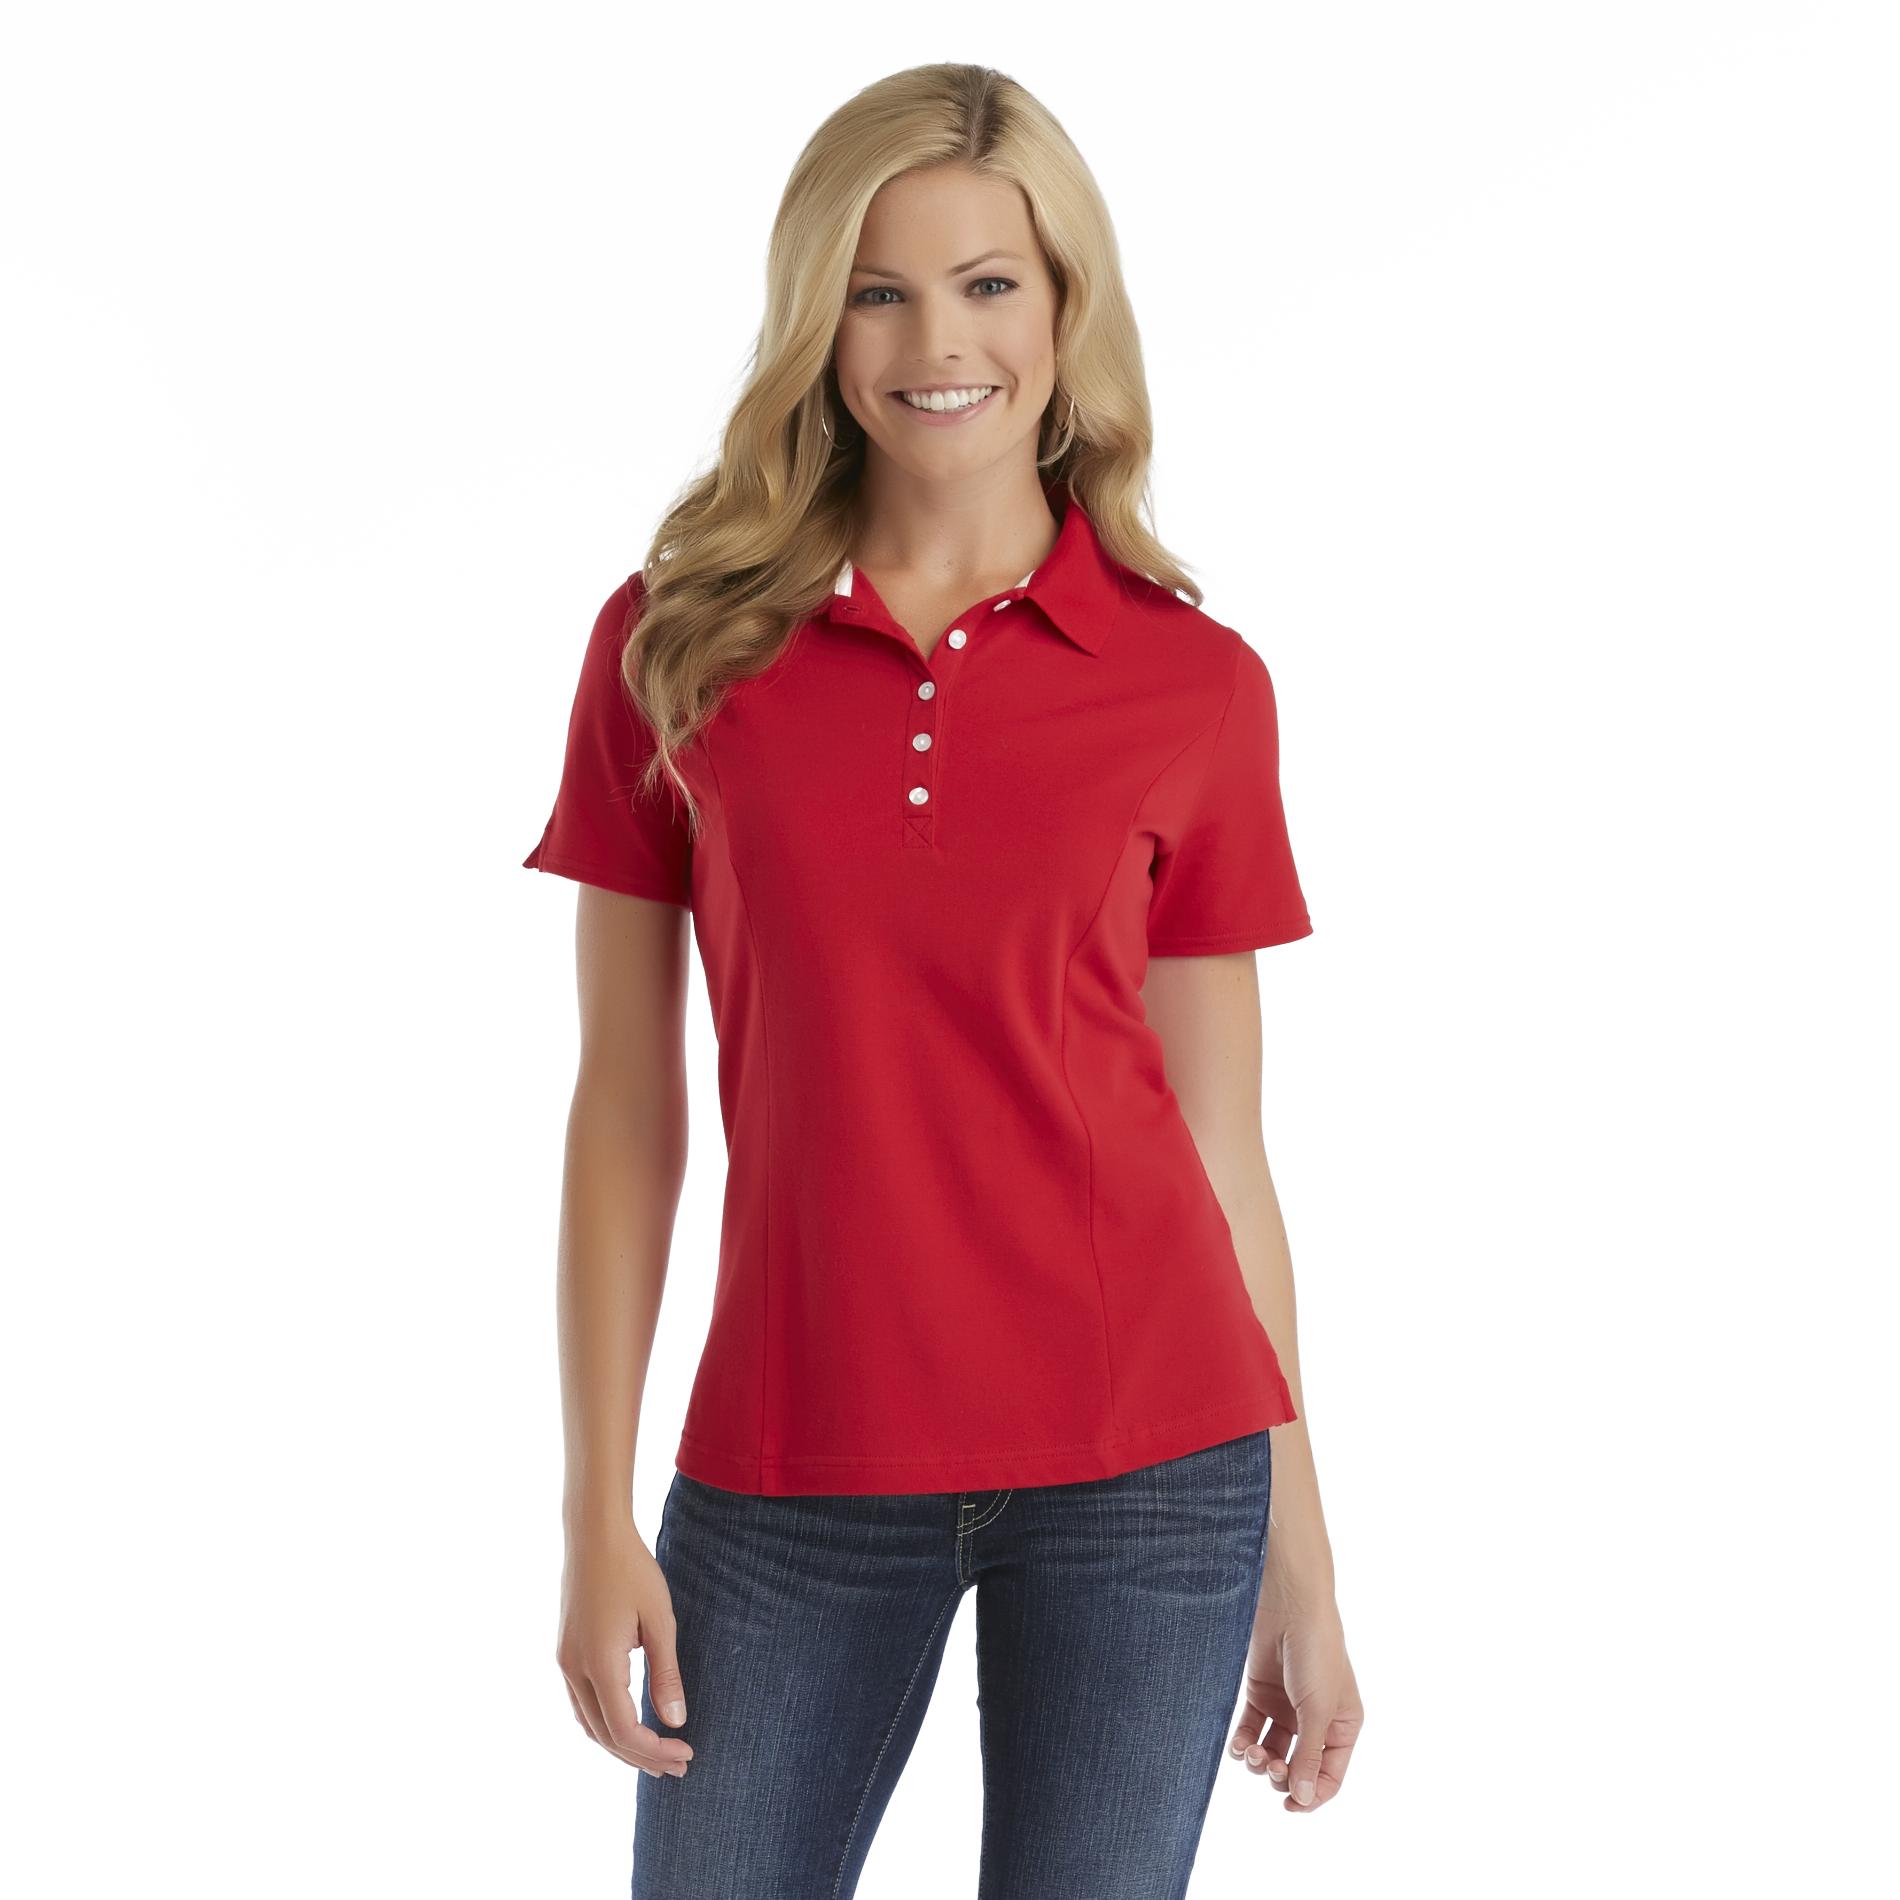 Riders by Lee Women's Slimming Silhouette Polo Shirt